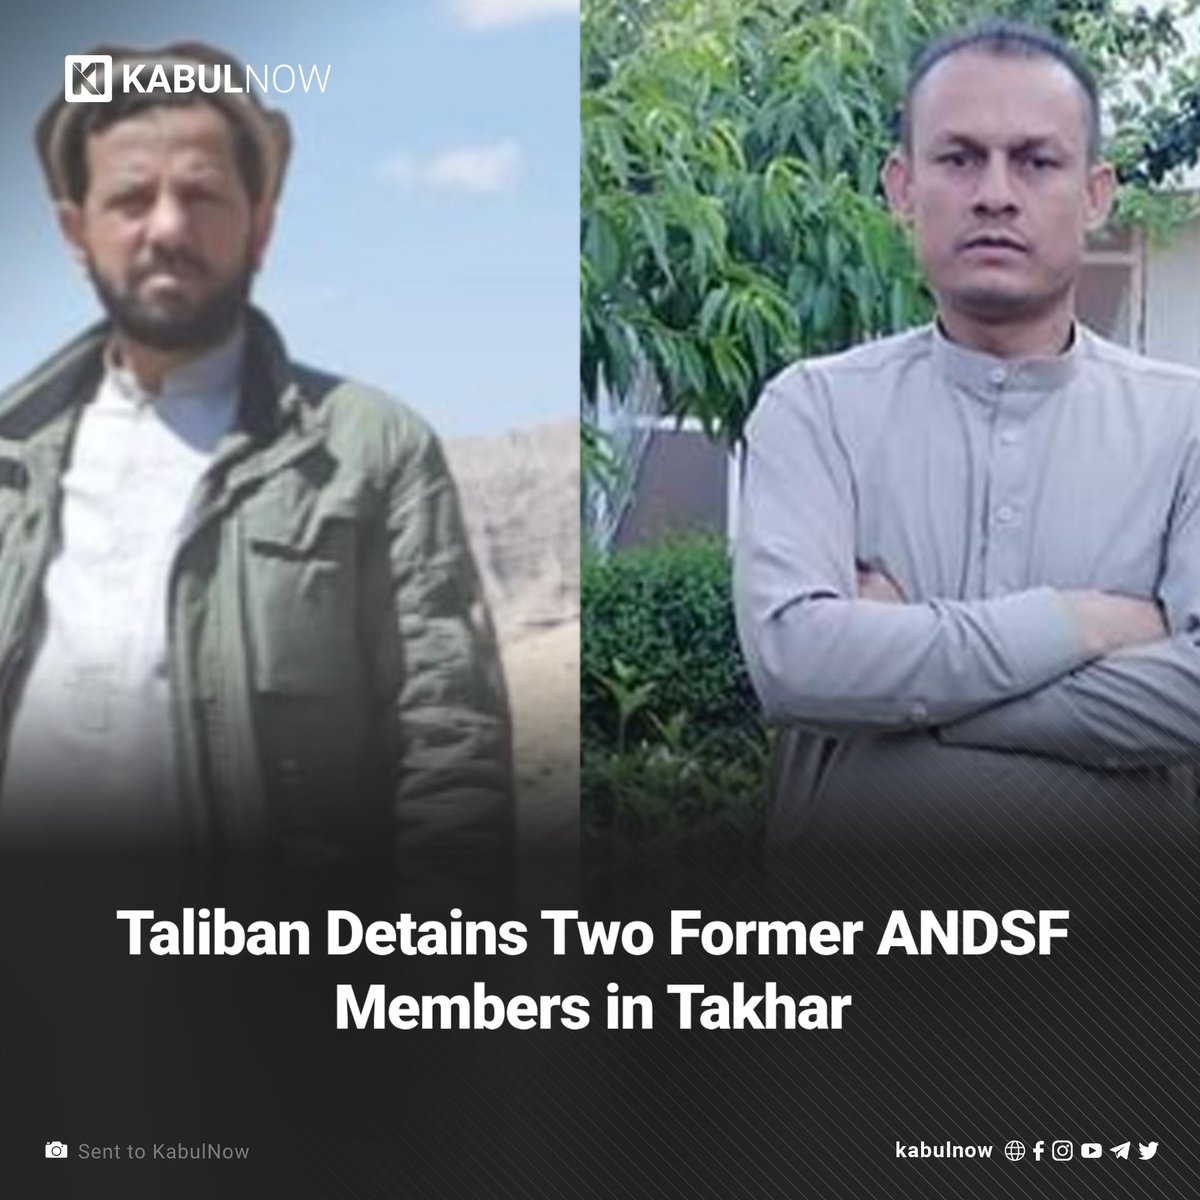 Local sources in northeastern Takhar province report that the Taliban has detained two members of the former Afghanistan National Defense and Security Forces (ANDSF) in the province.

Read more here: kabulnow.com/?p=35591